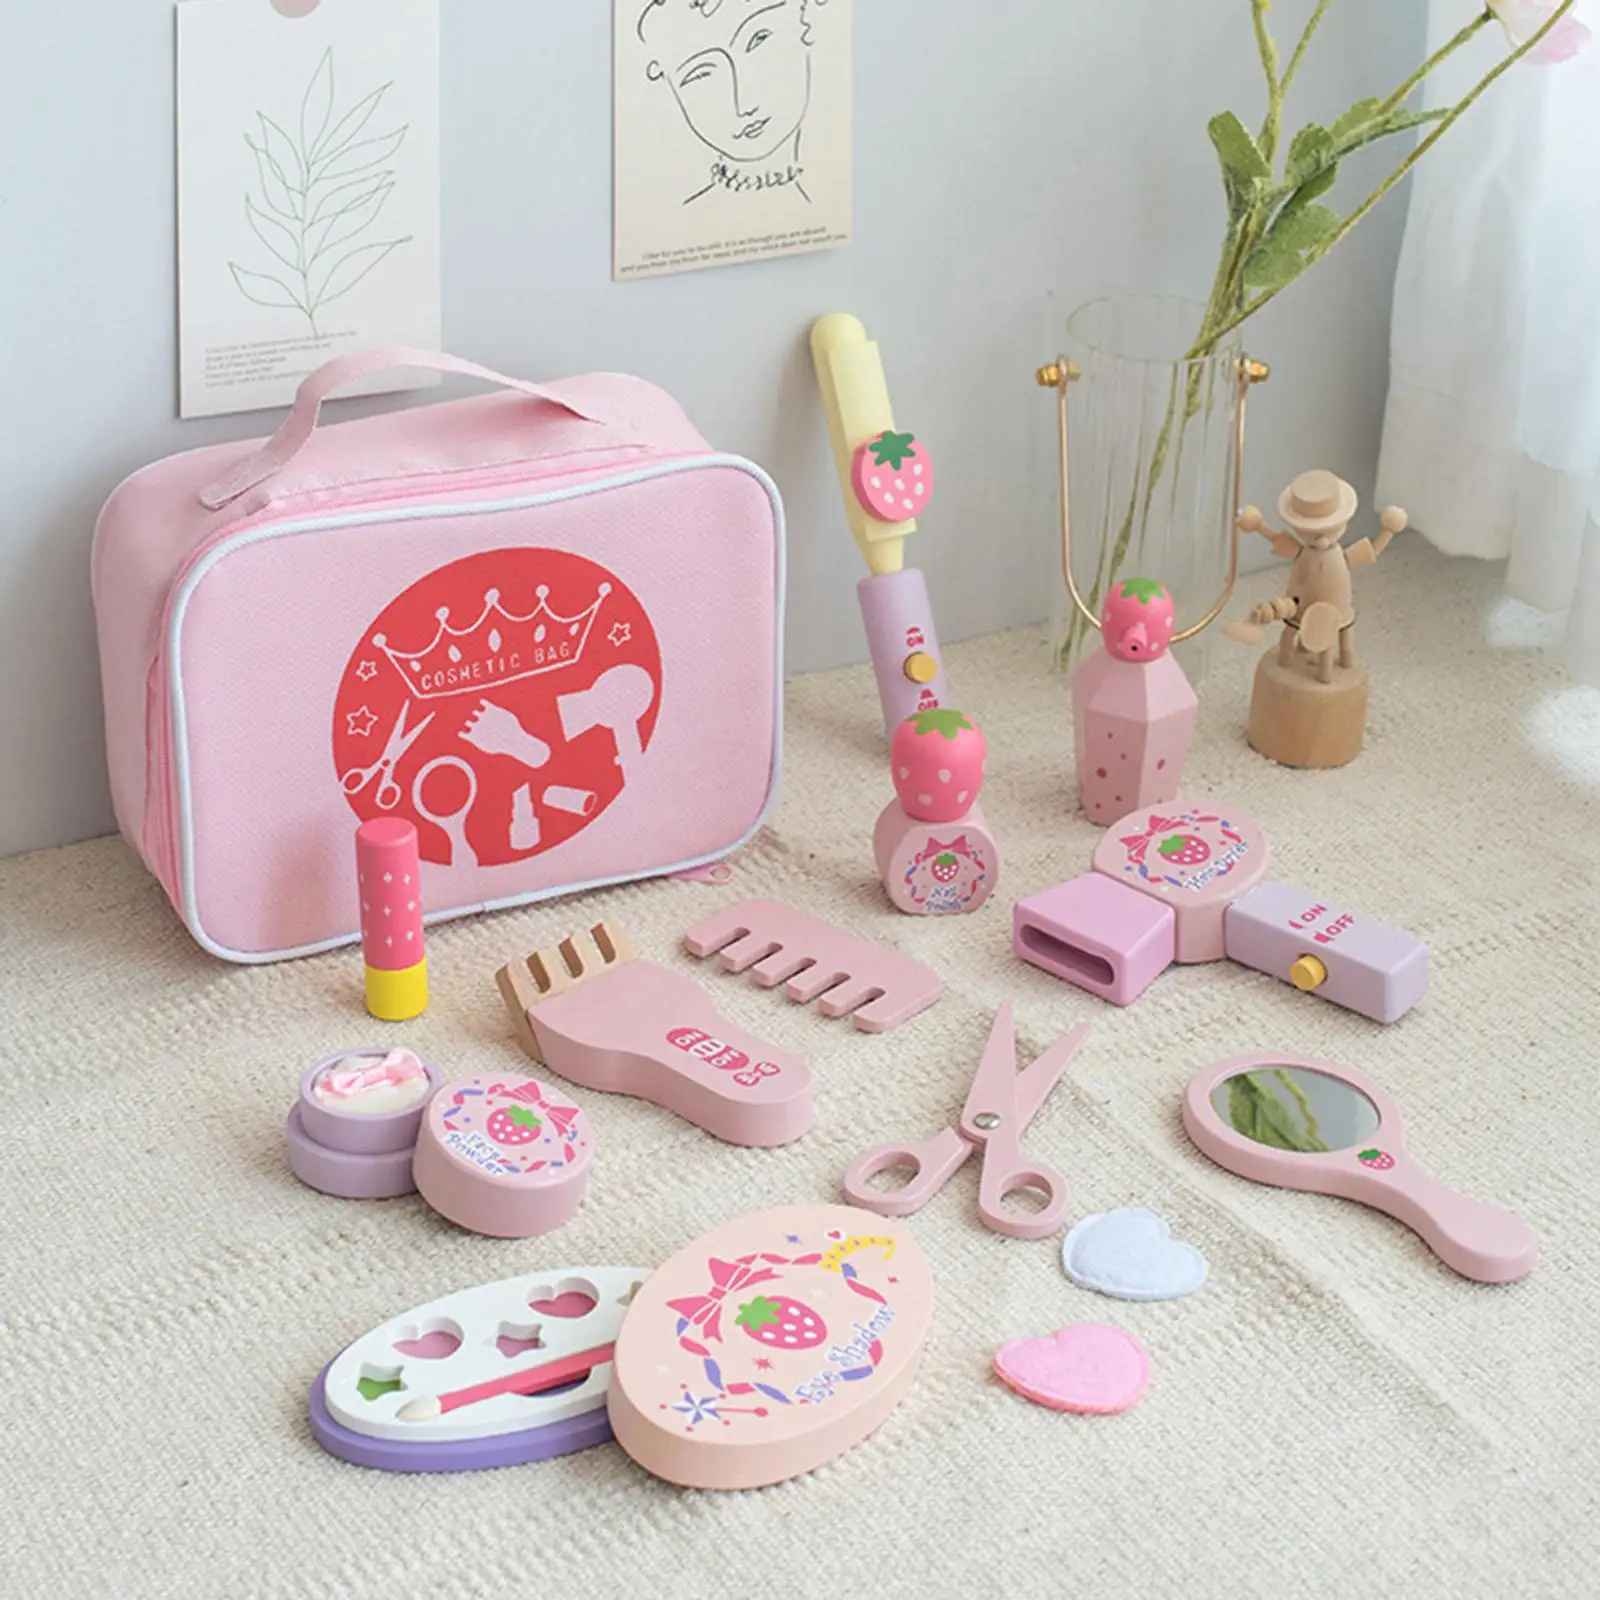 Miniature Pretend Makeup Game Washable Wooden with Cosmetic Bag Simulation Play House Toys Set for Game Role Play Toddler Girls